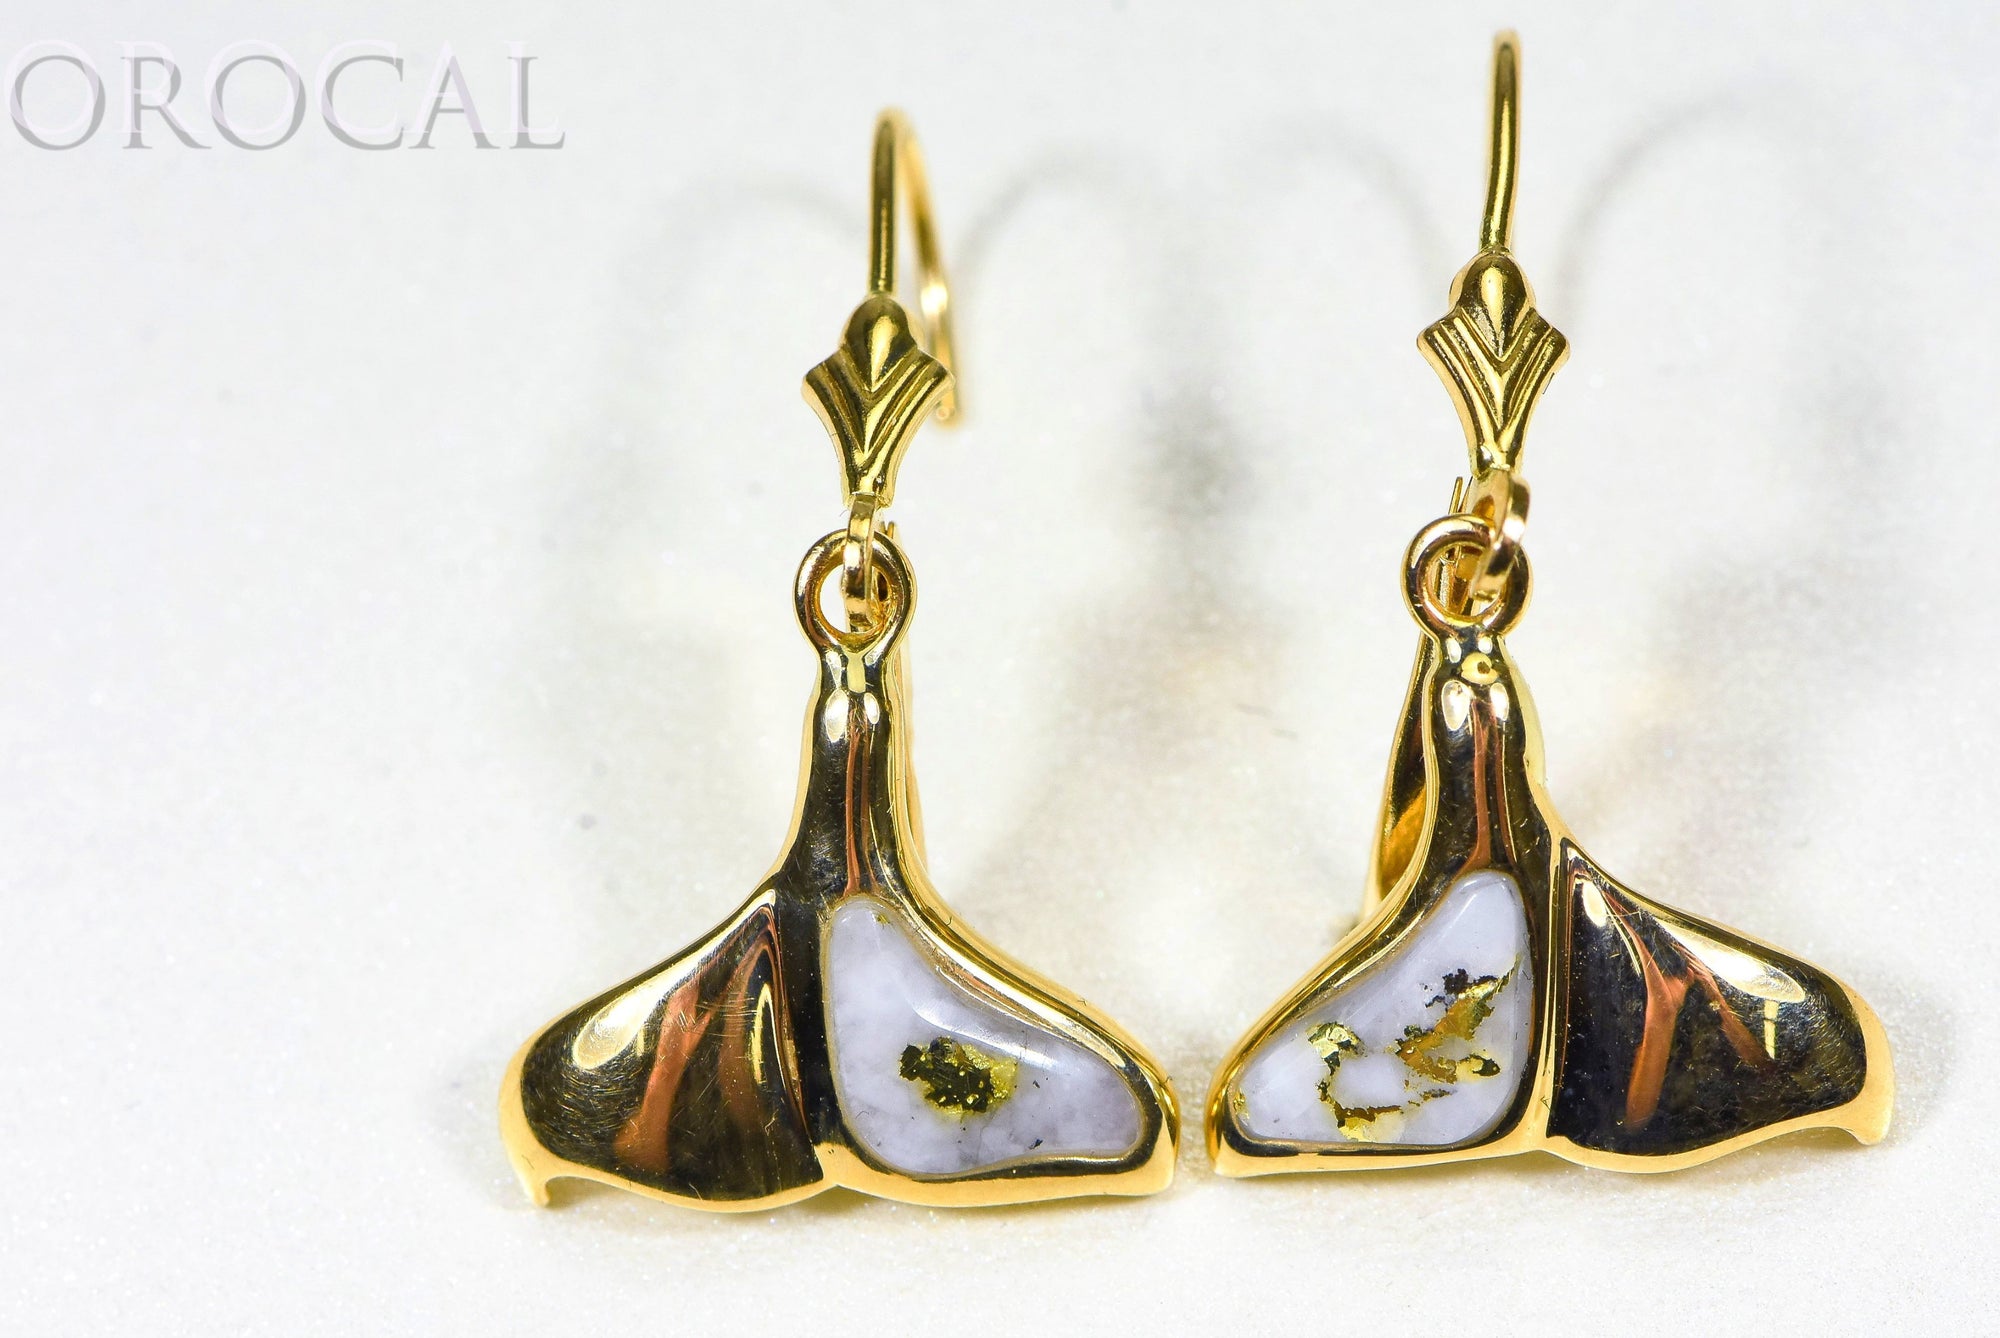 Gold Quartz Earrings "Orocal" EDL12WT12Q/LB Genuine Hand Crafted Jewelry - 14K Gold Casting